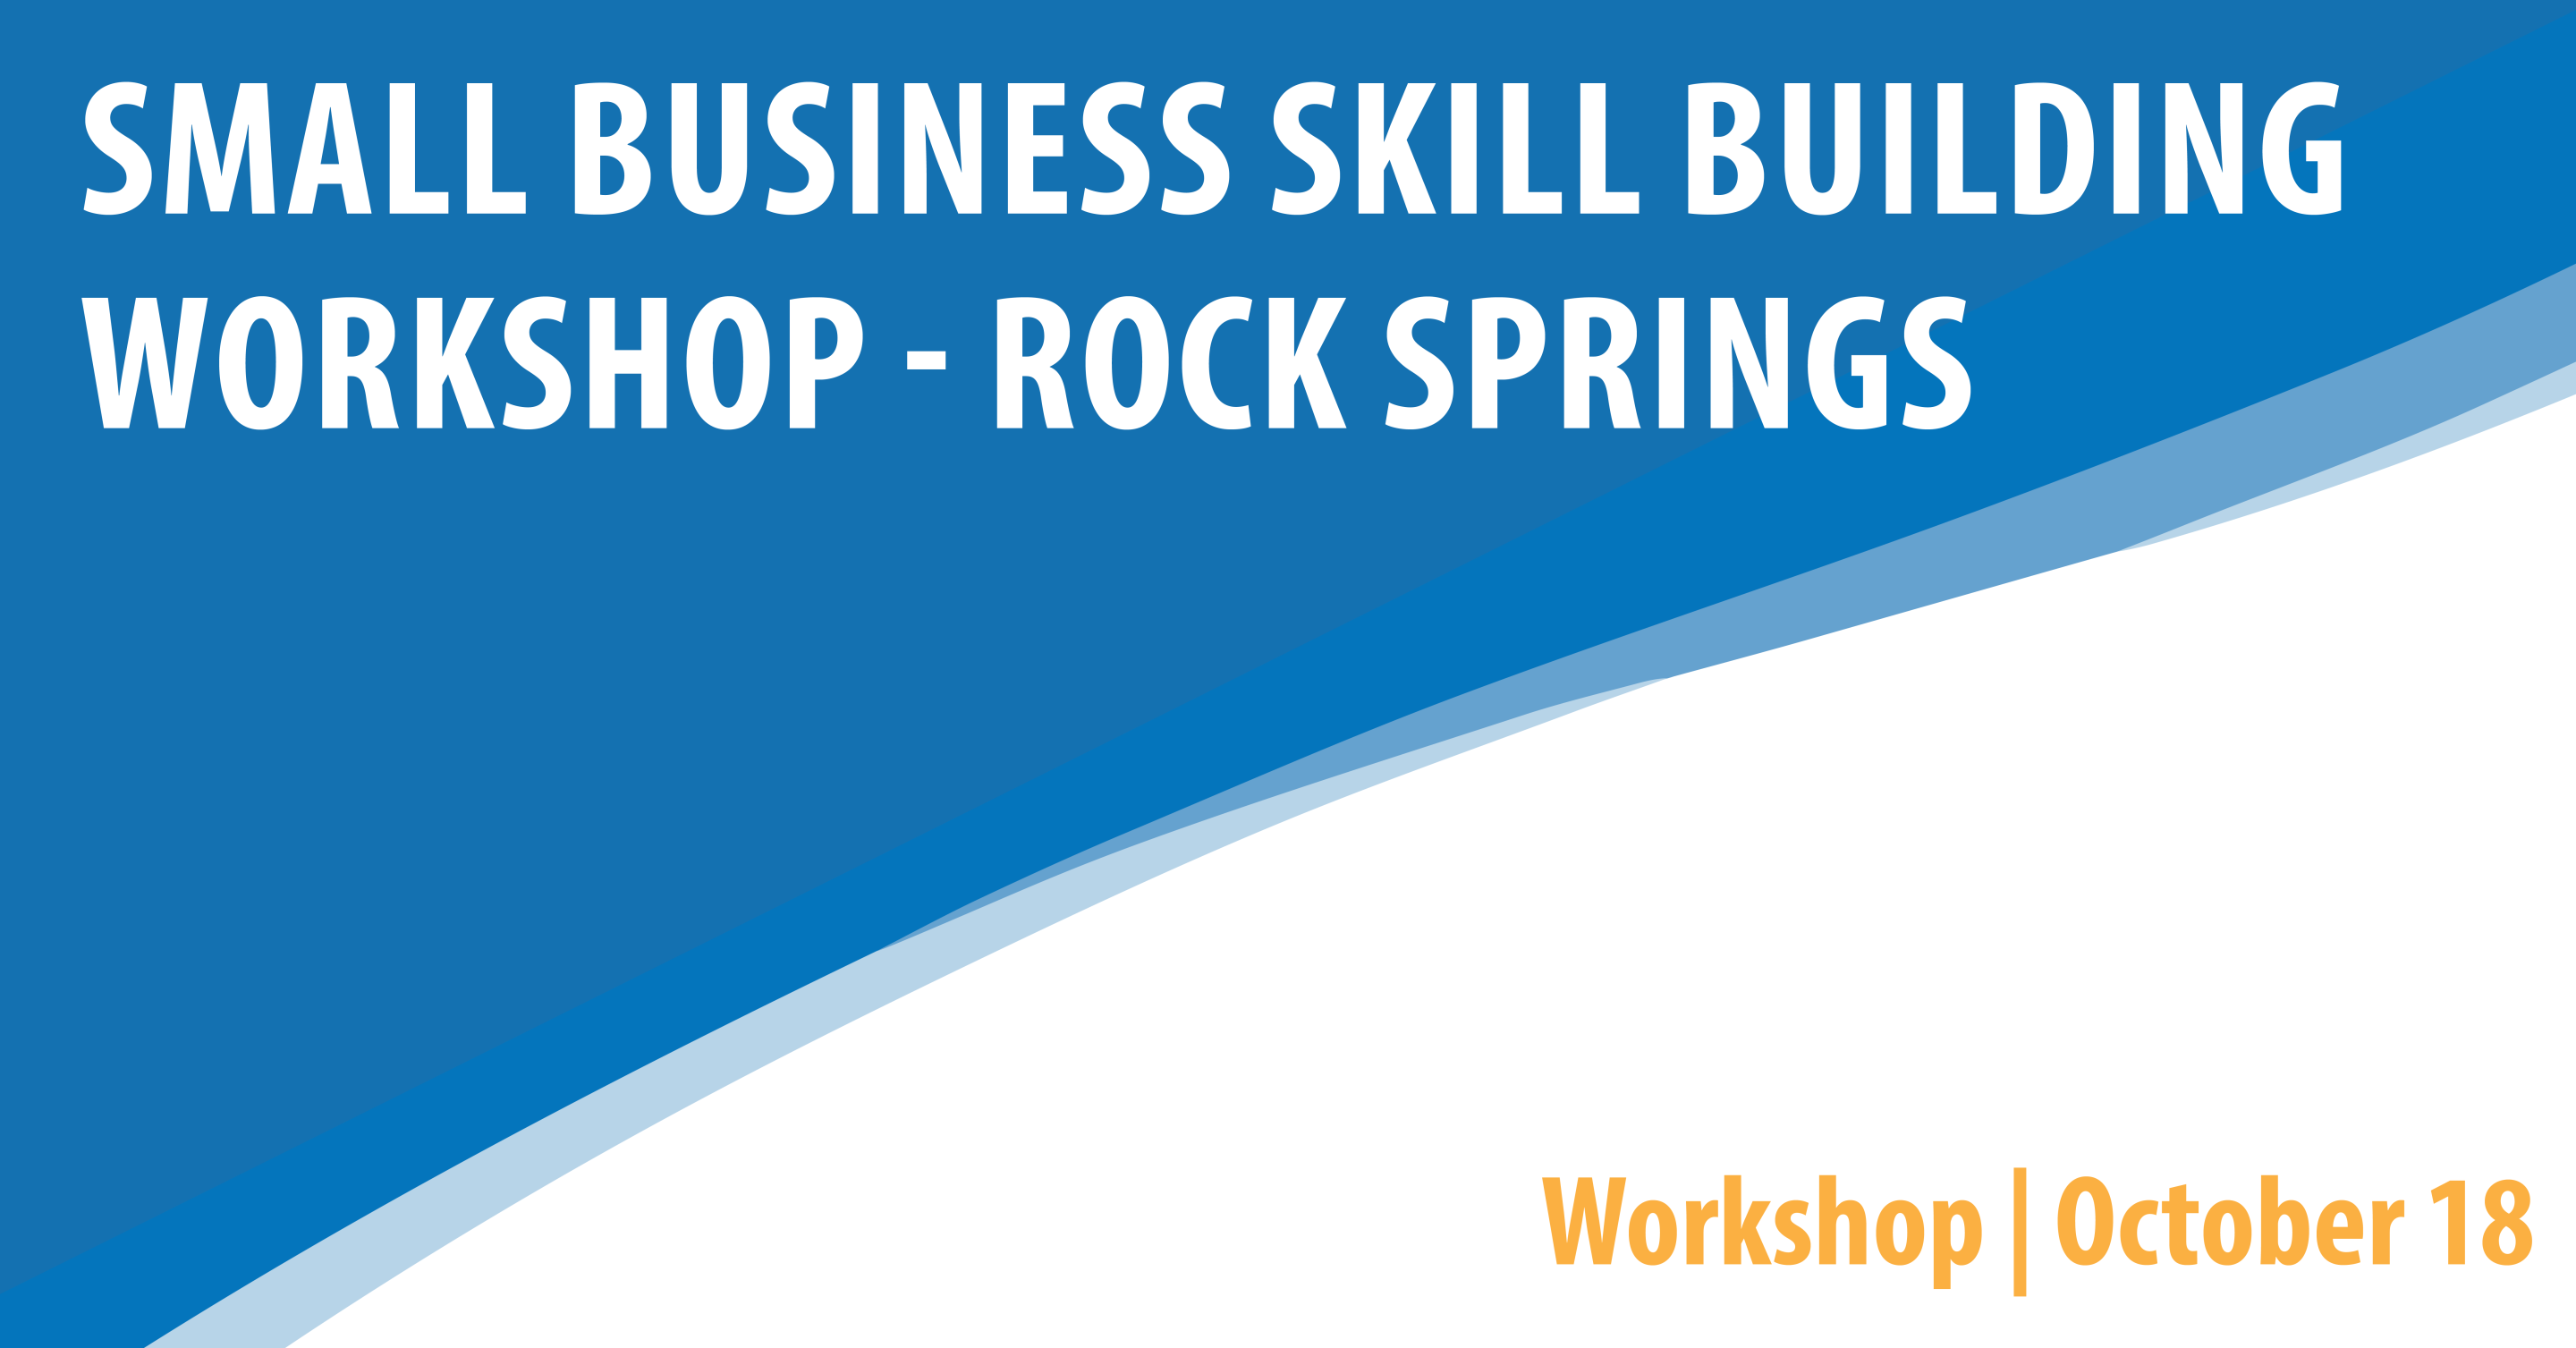 Small Business Skill-Building Workshop - Rock Springs